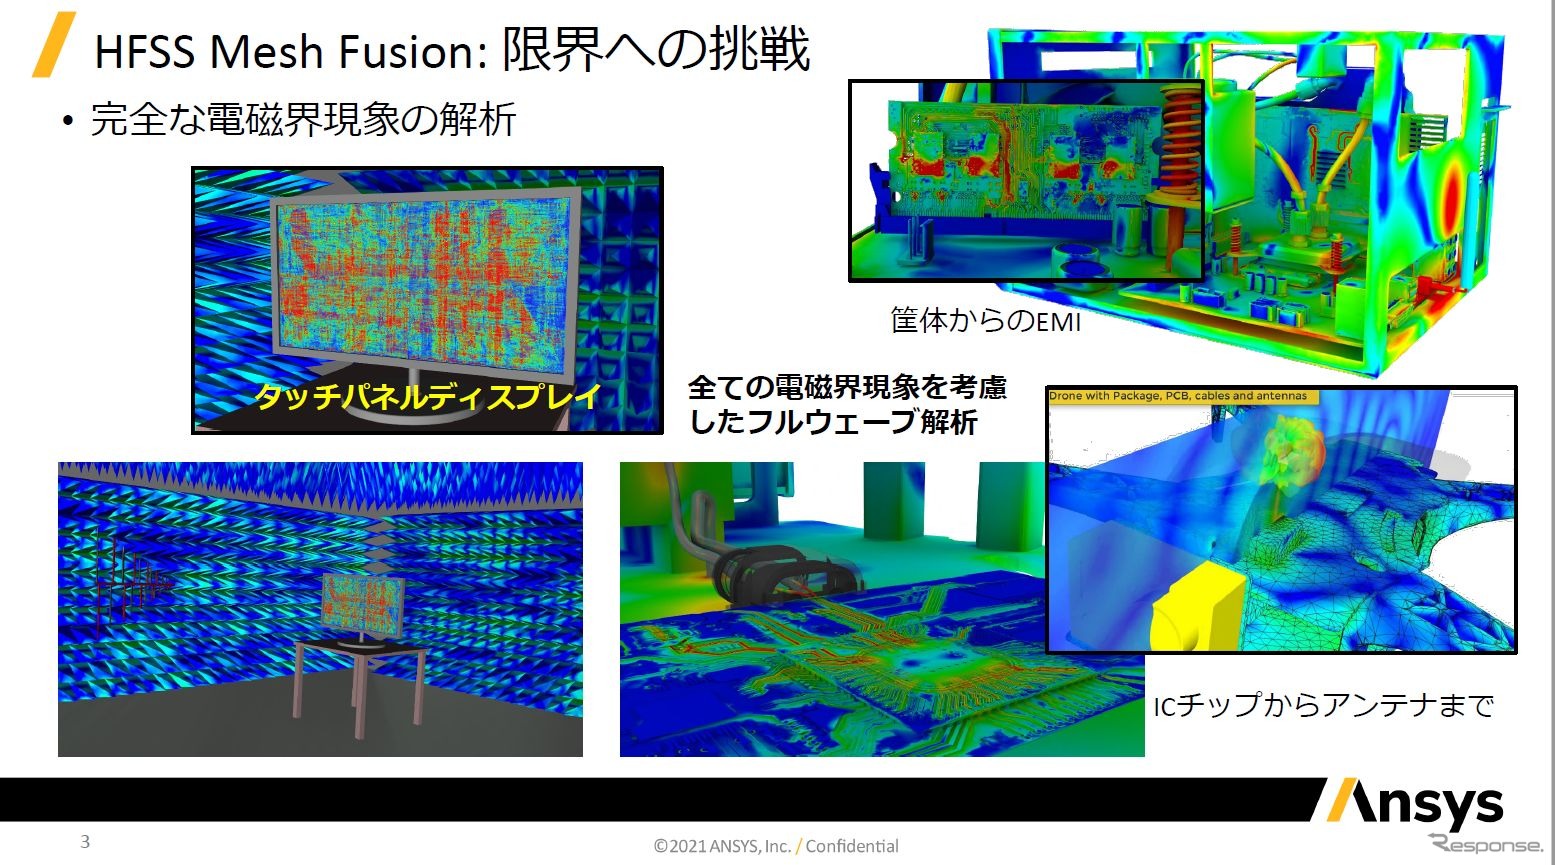 Ansys HFSS Mesh Fusion発表